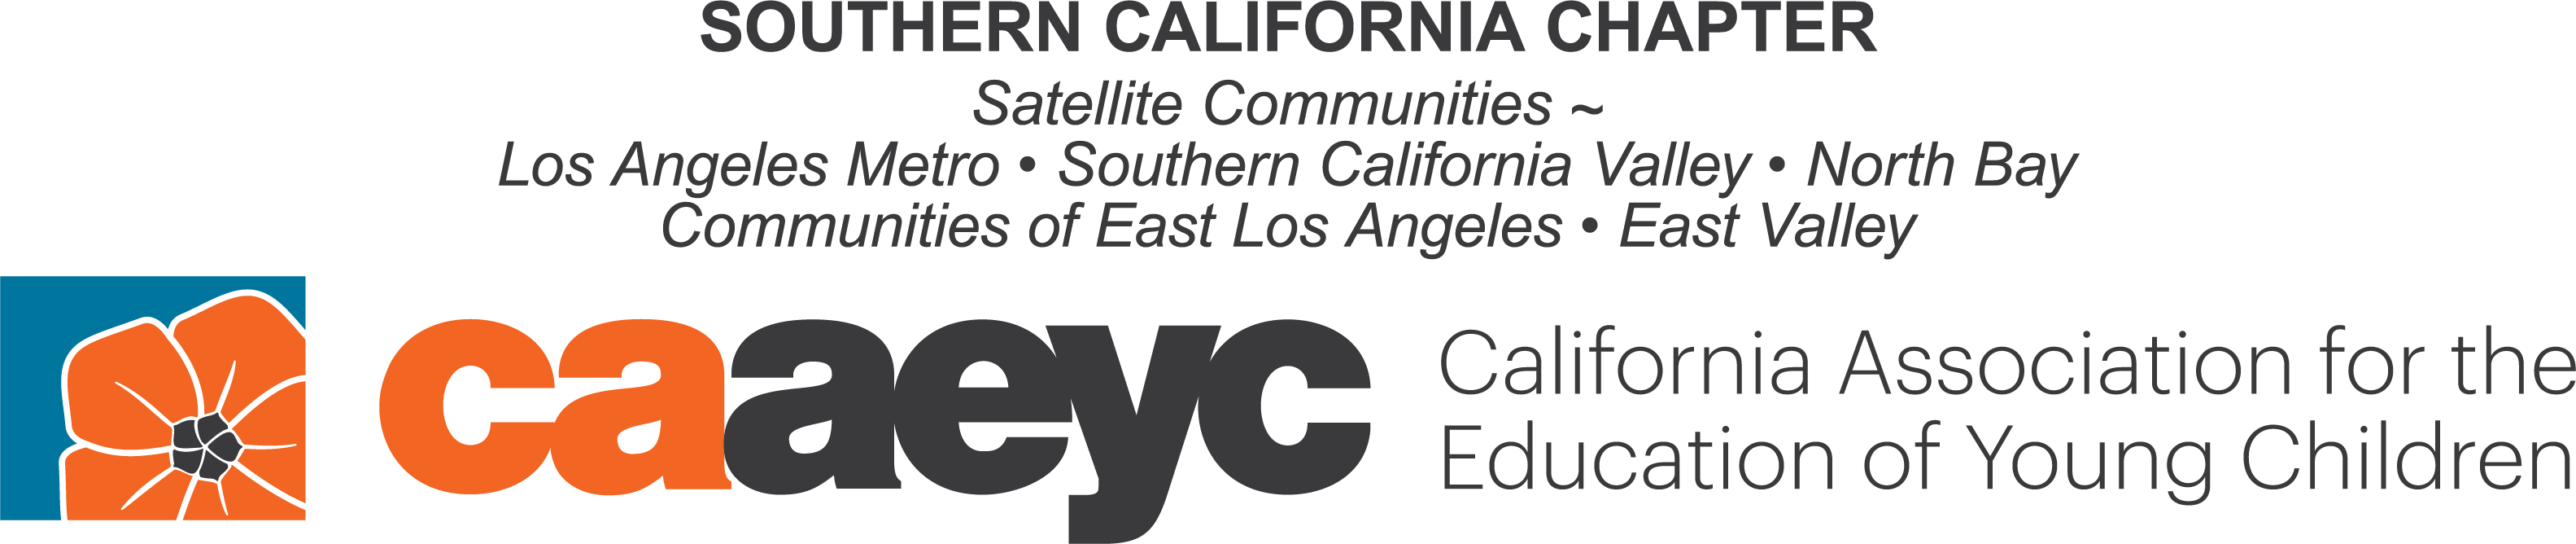 CAAEYC Southern California Chapter